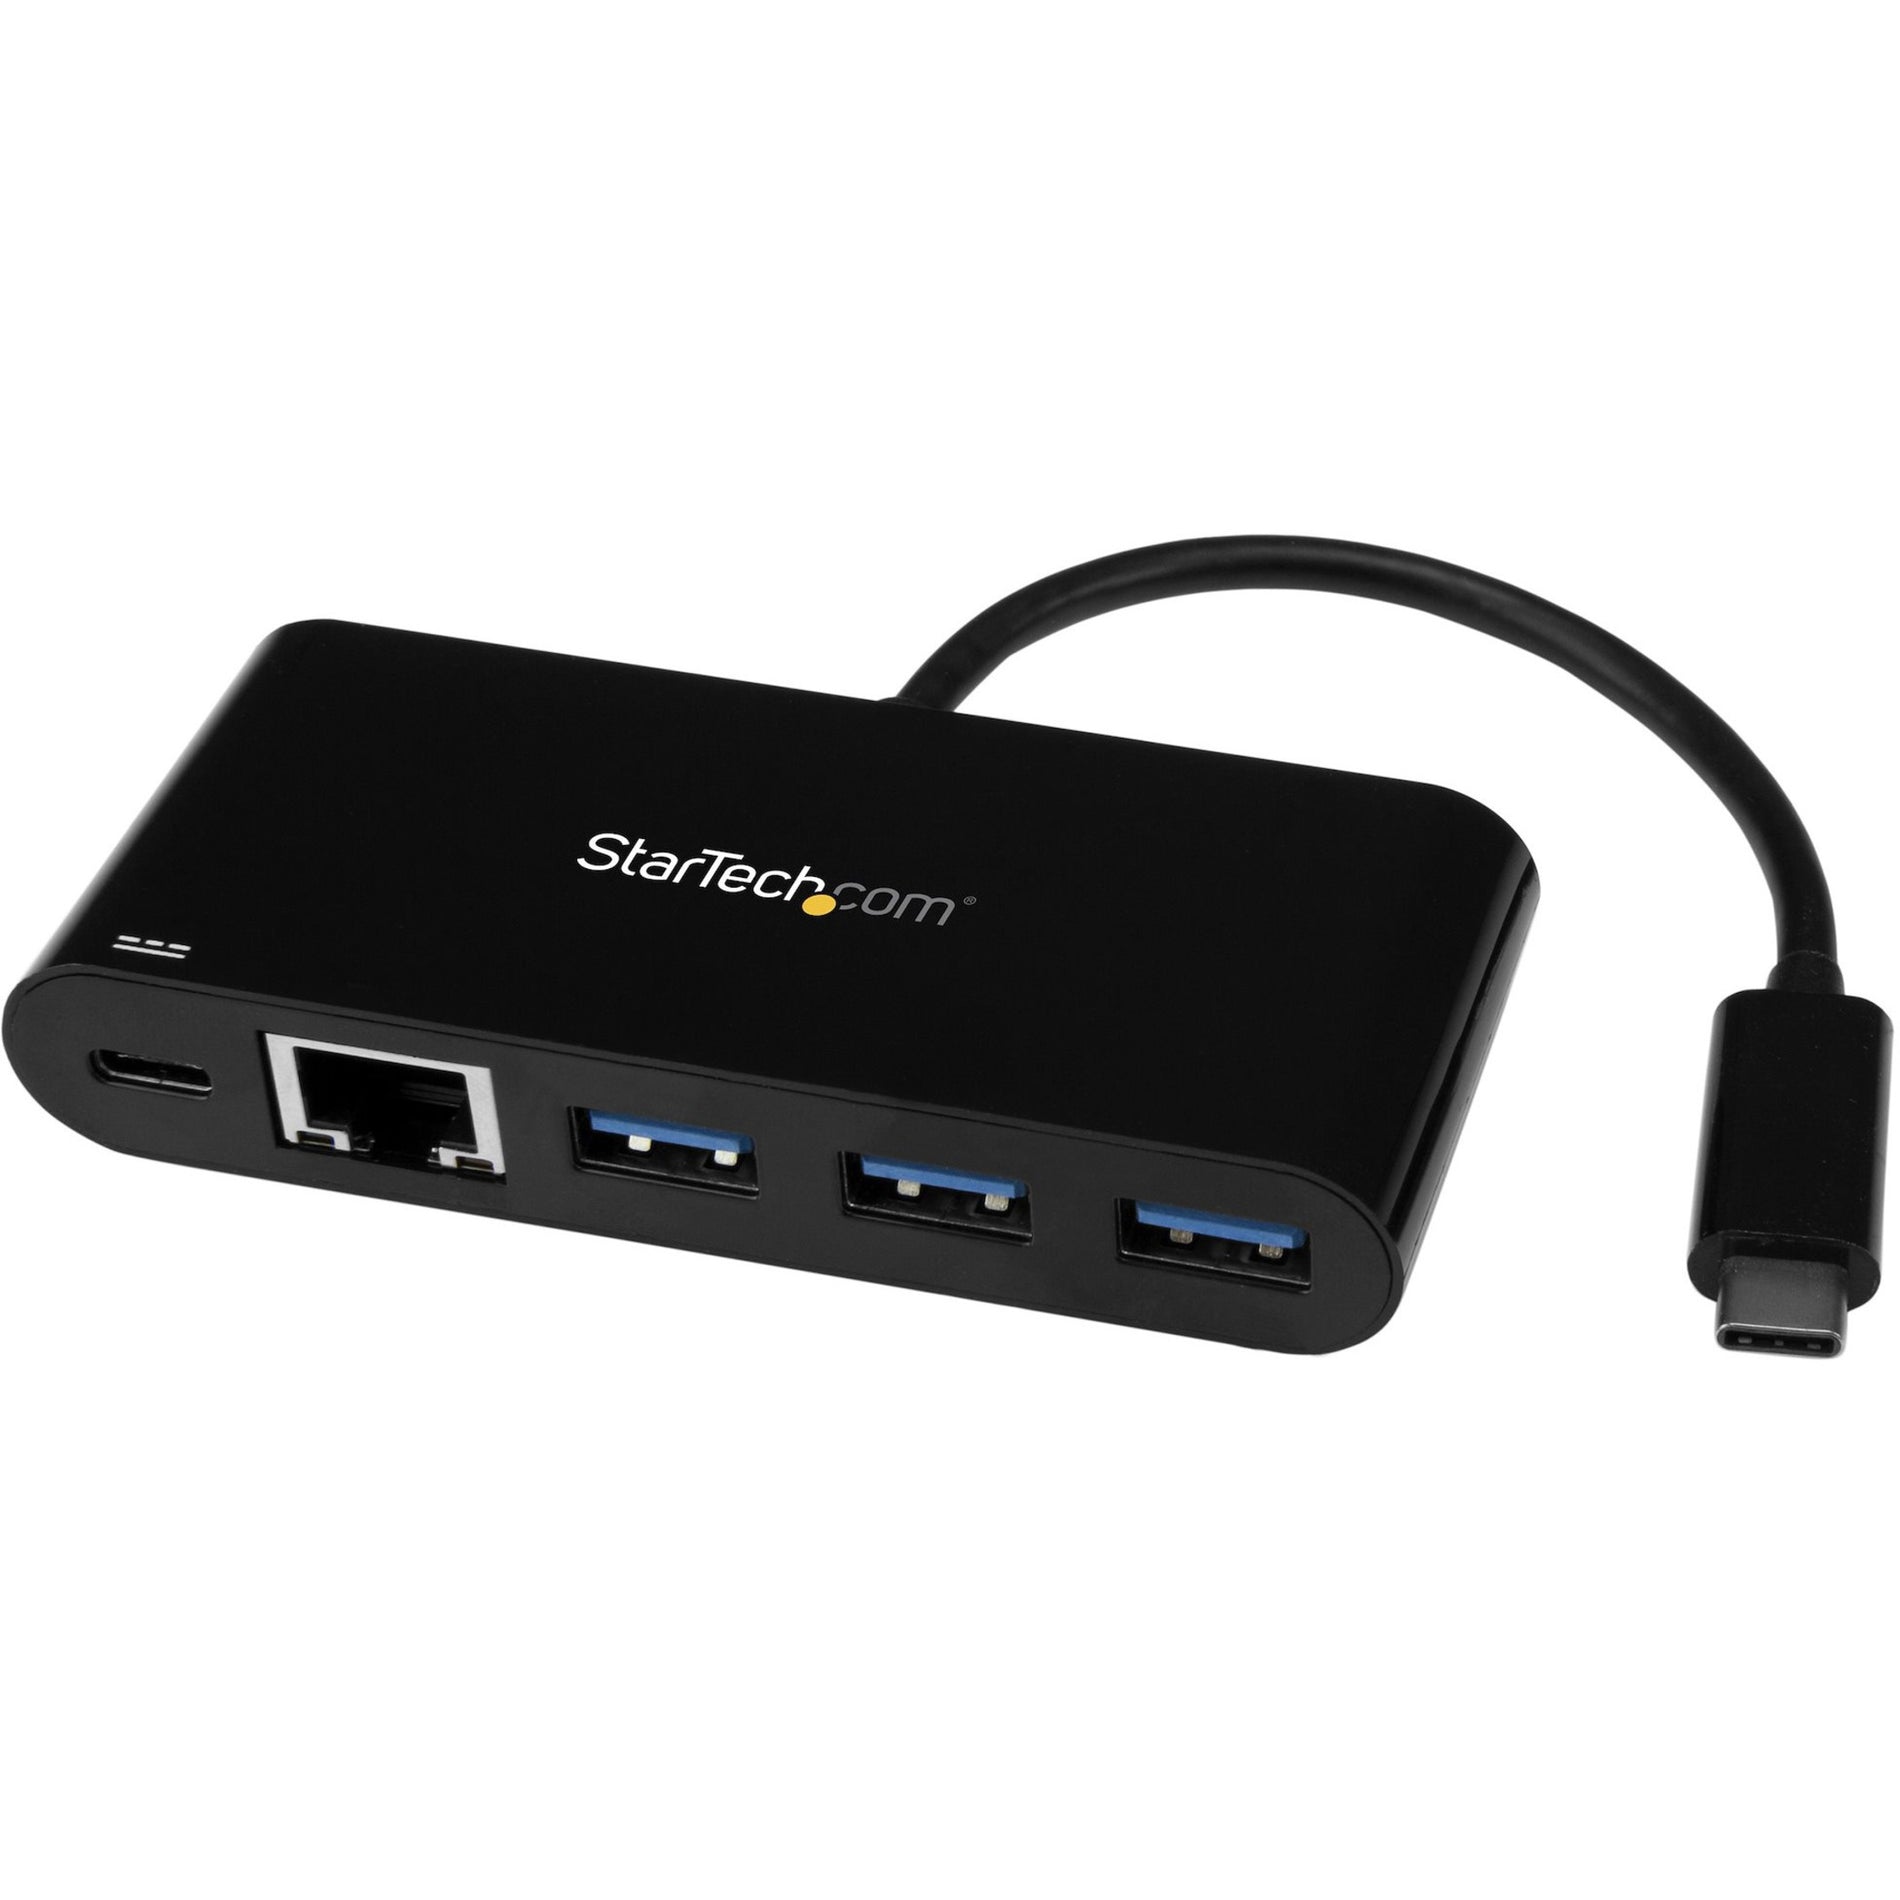 StarTech.com US1GC303APD USB-C to Ethernet Adapter with 3-Port USB 3.0 Hub and Power Delivery, USB-C GbE Network Adapter + USB Hub w/ 3 USB-A Ports